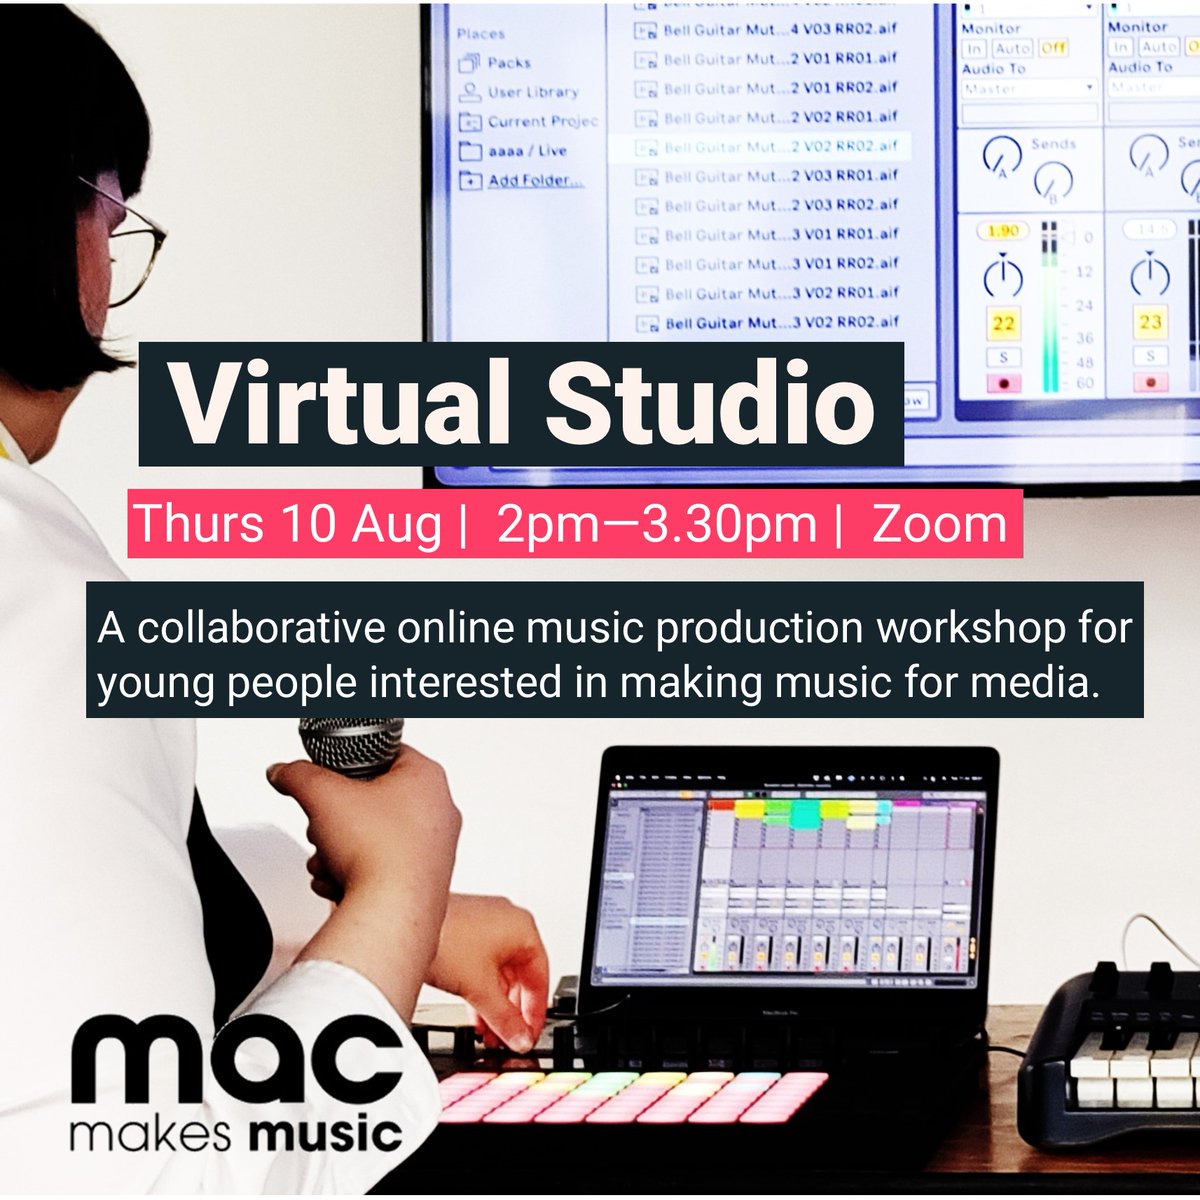 Love listening to soundtracks from your favourite films or video games? Thinking of doing music tech or media studies at college or uni? #VirtualStudio is a collaborative online music production workshop for 13-18s interested in making music for media. rb.gy/hj3b4